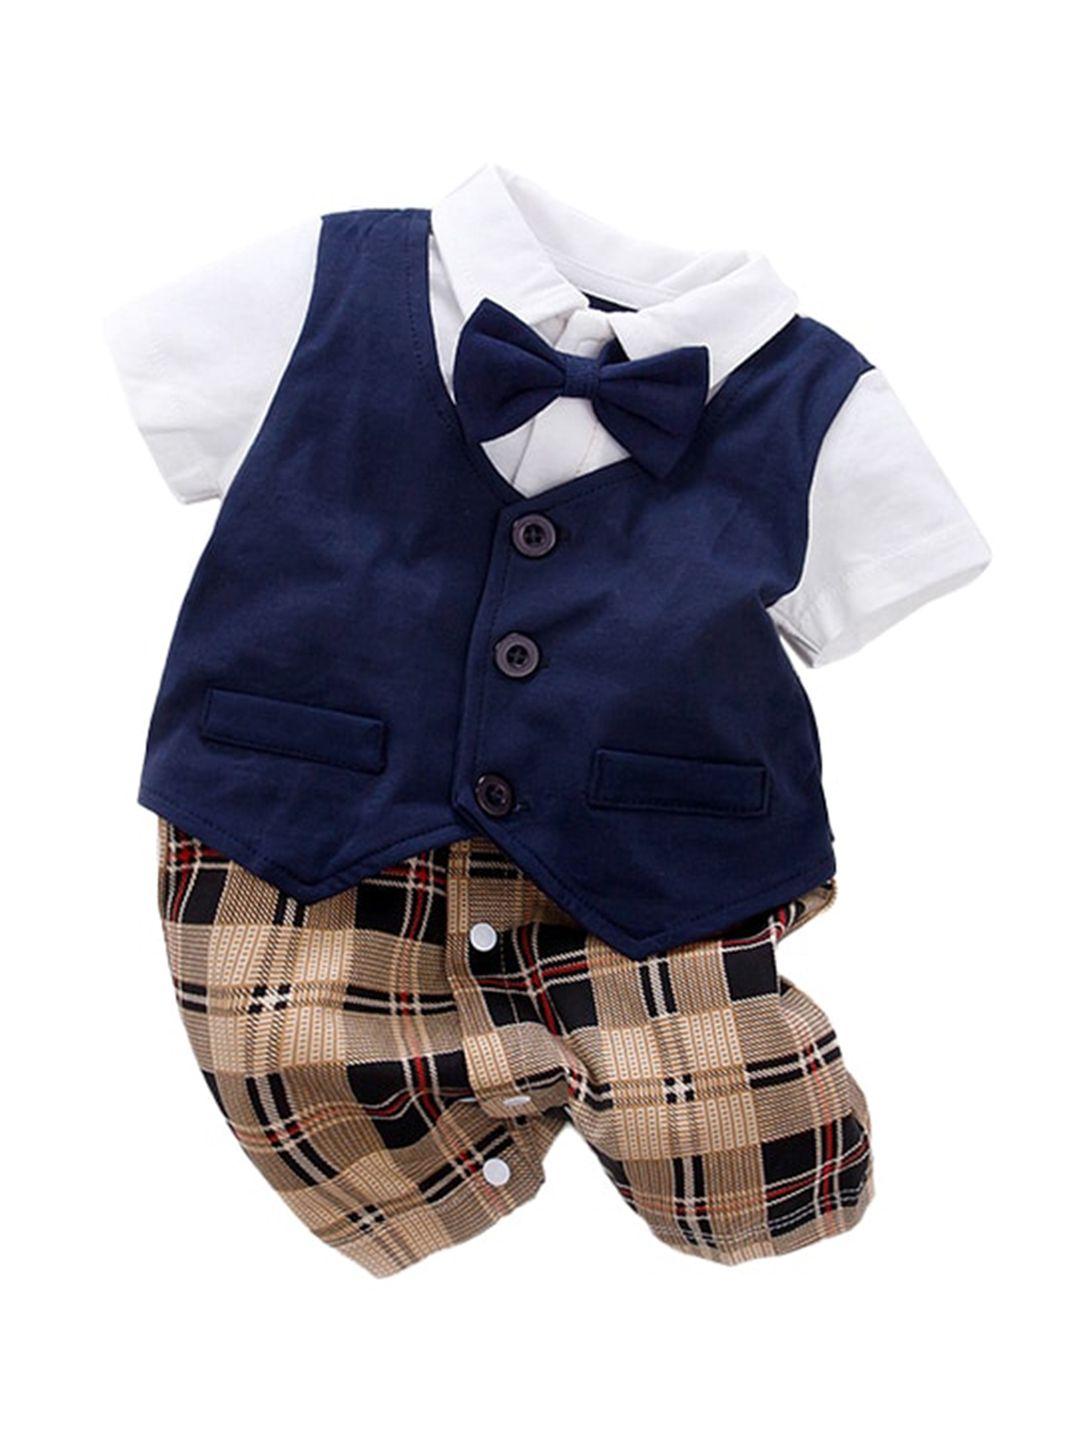 stylecast infant boys navy blue checked cotton rompers with bow